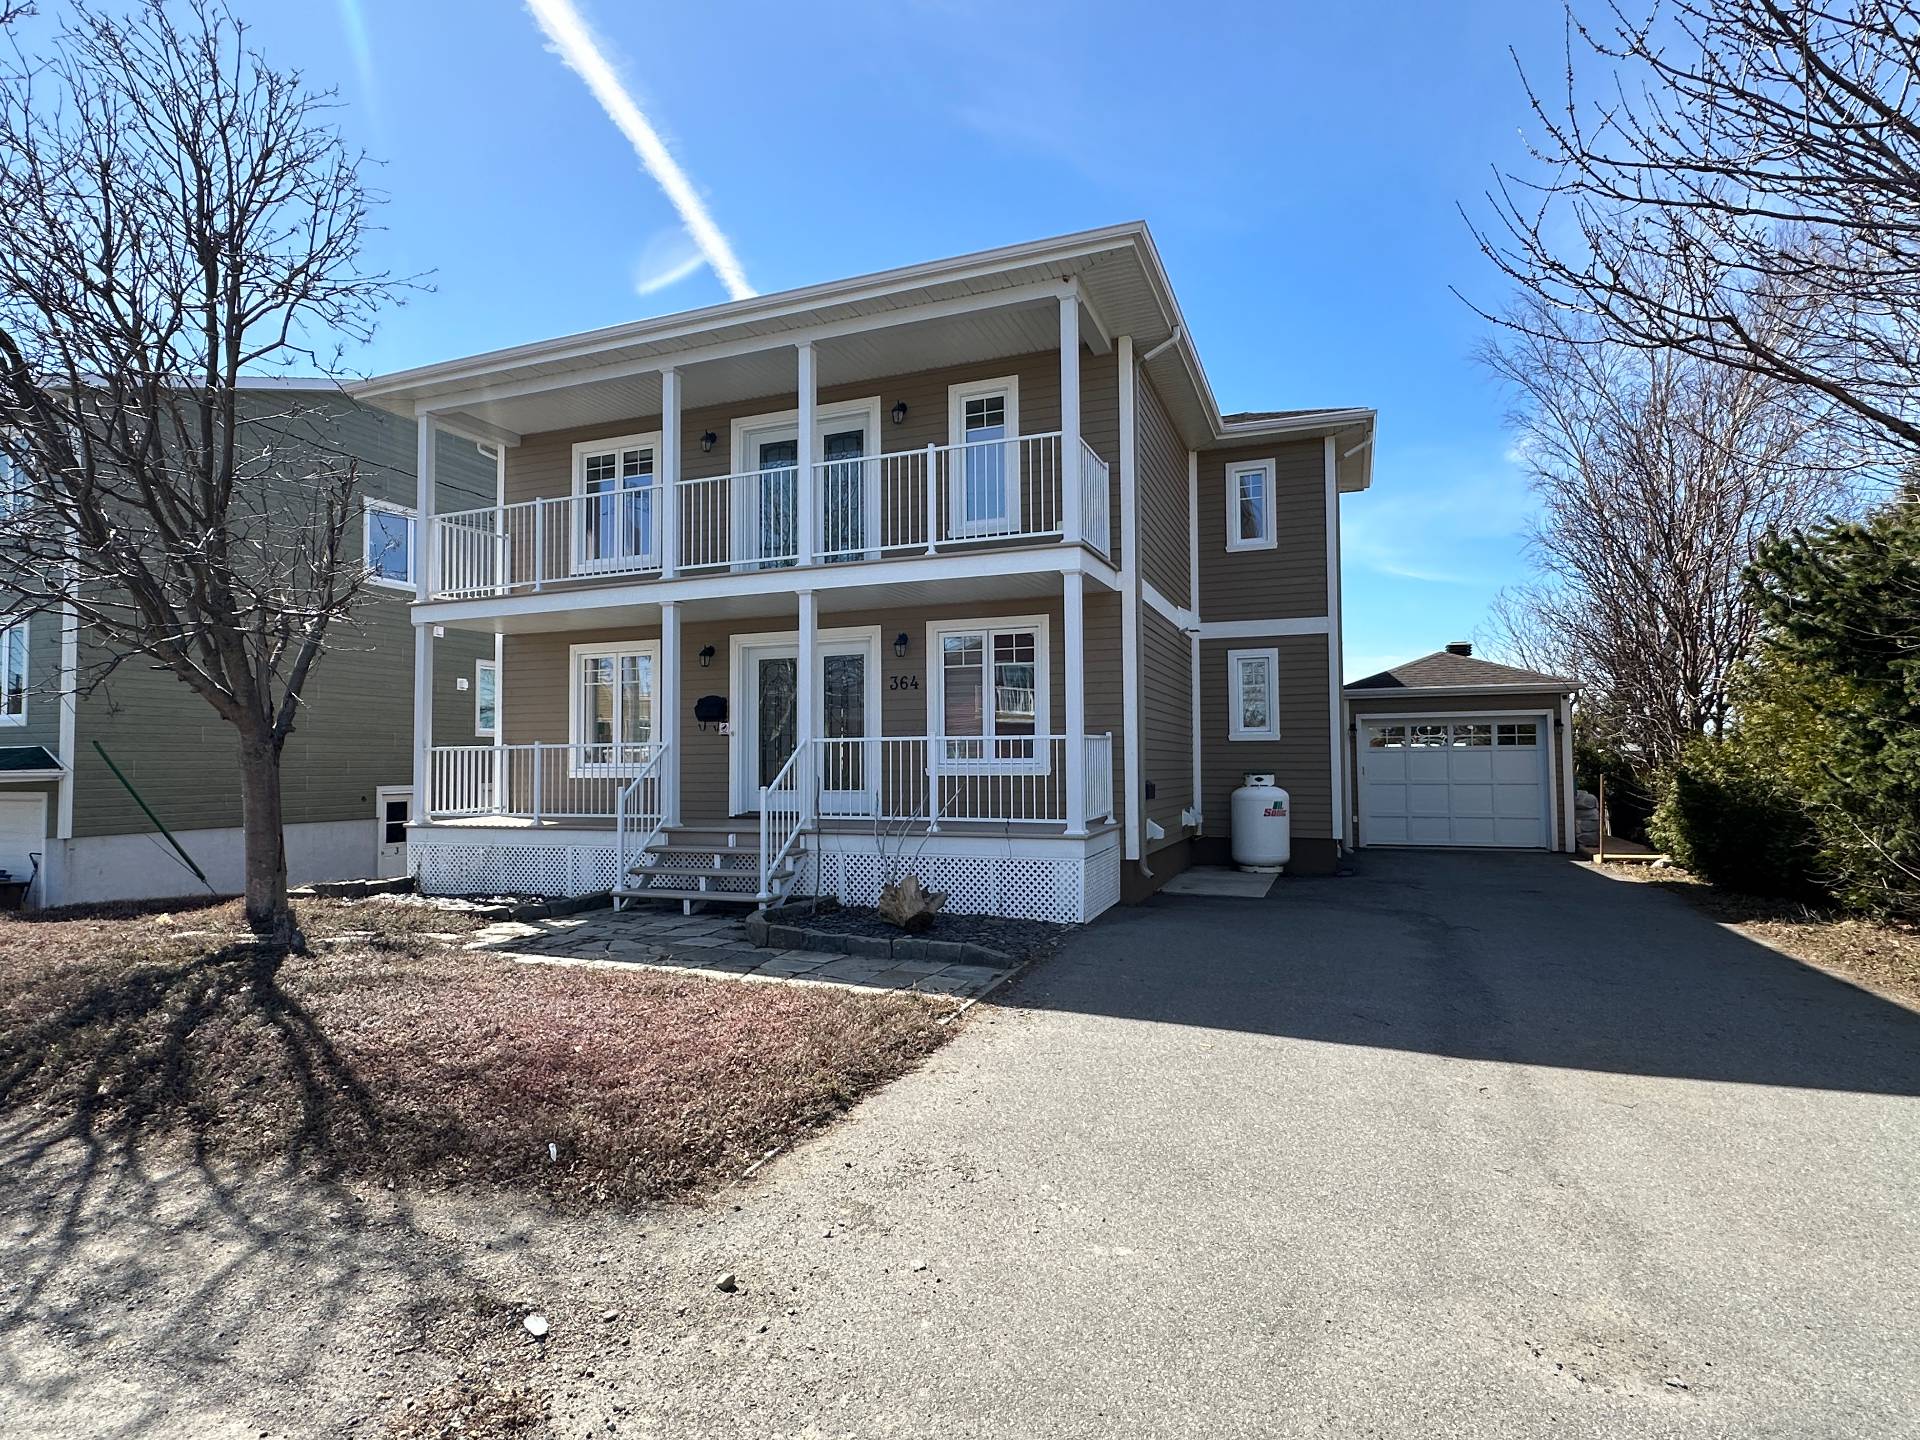 Two or more storey for sale, Rimouski